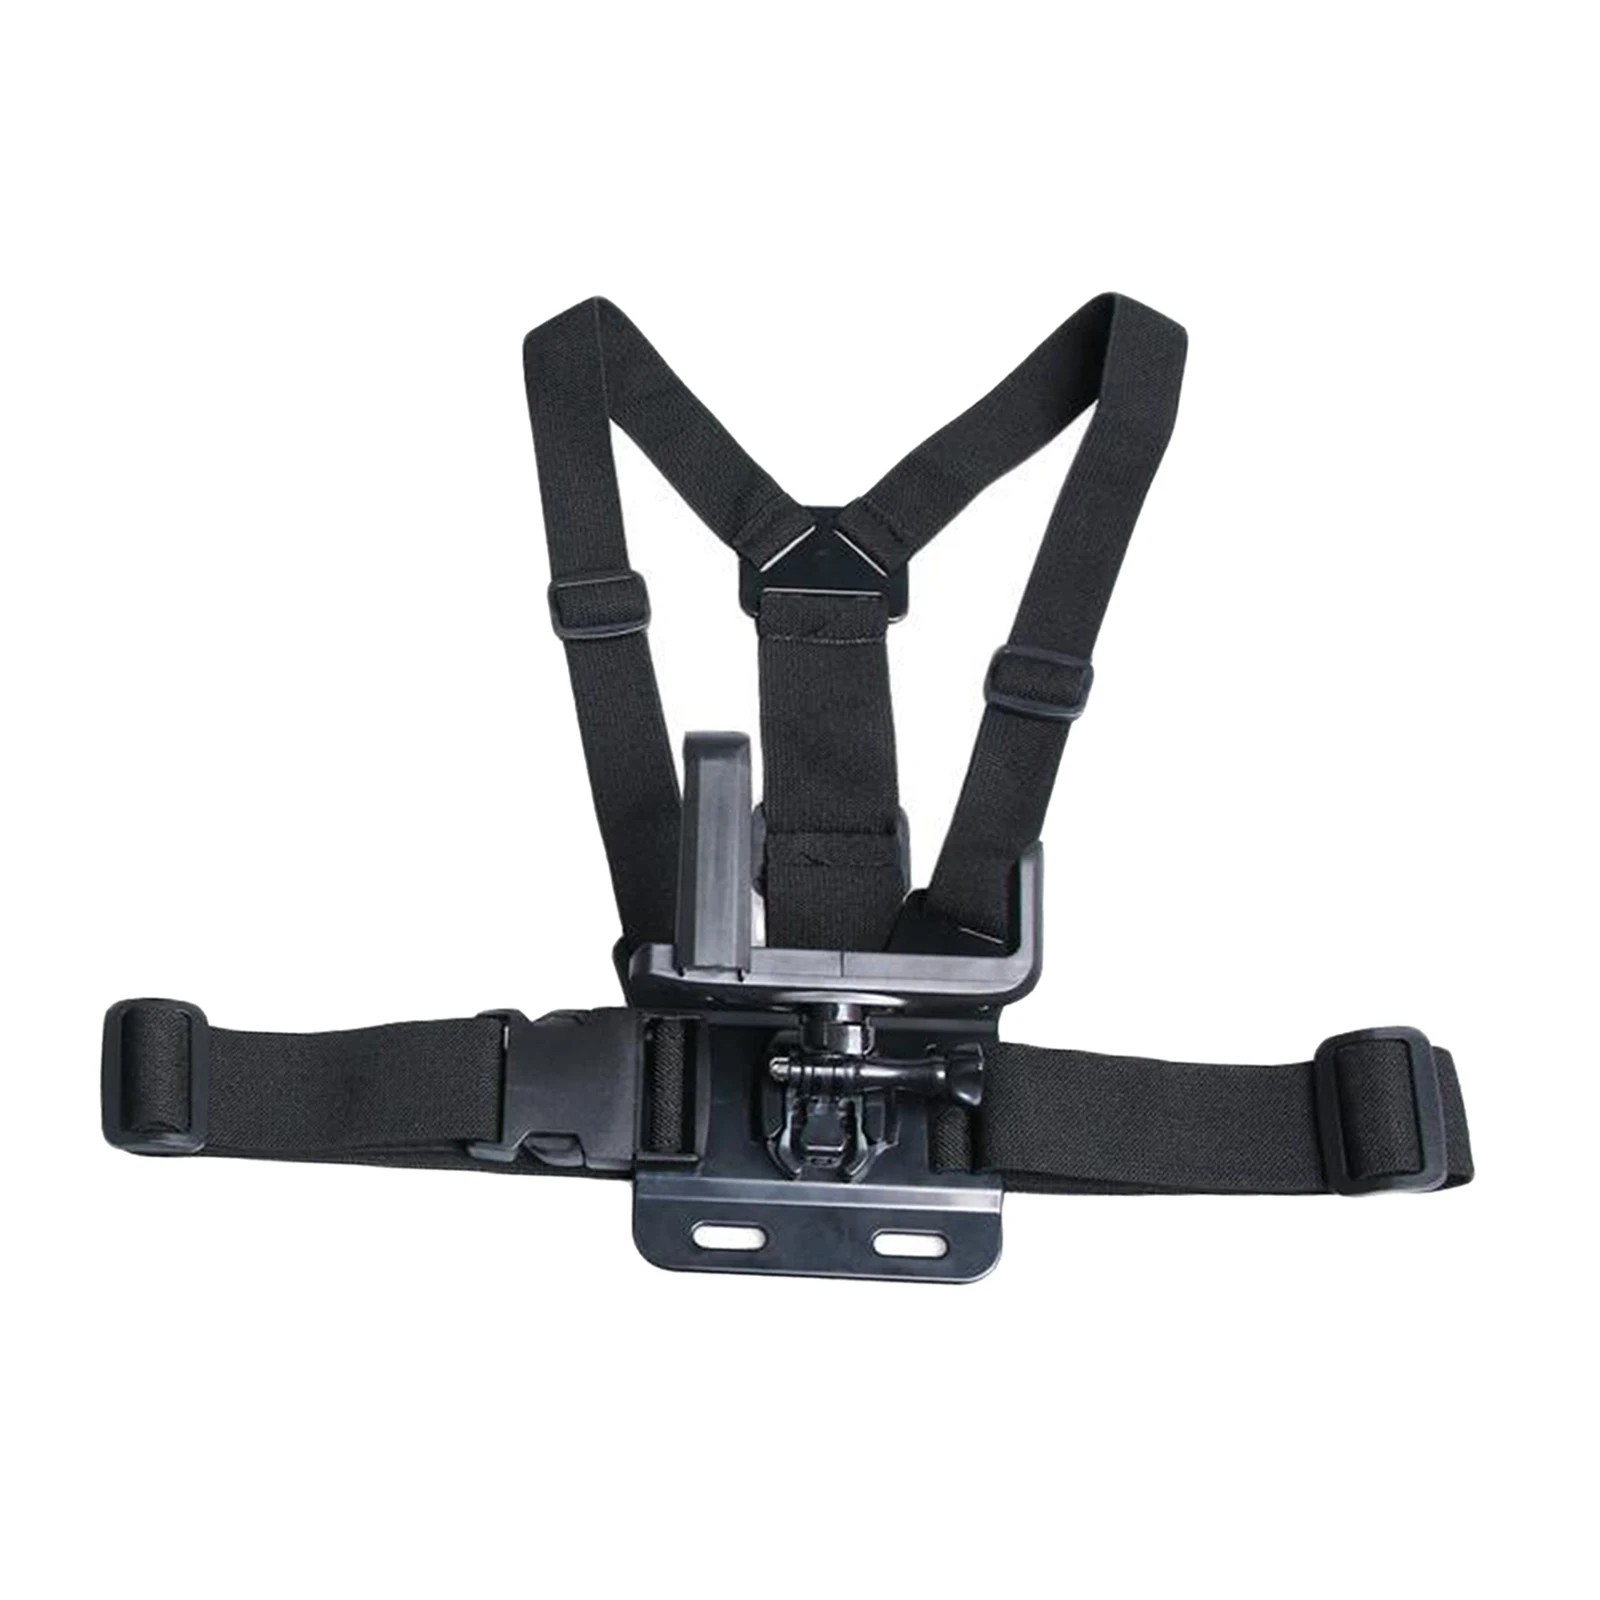 Adjustable Mobile Phone Body Chest Harness Mount Strap with Clip for Fishing Biking, Easy to Wear, Breathable and Comfortable